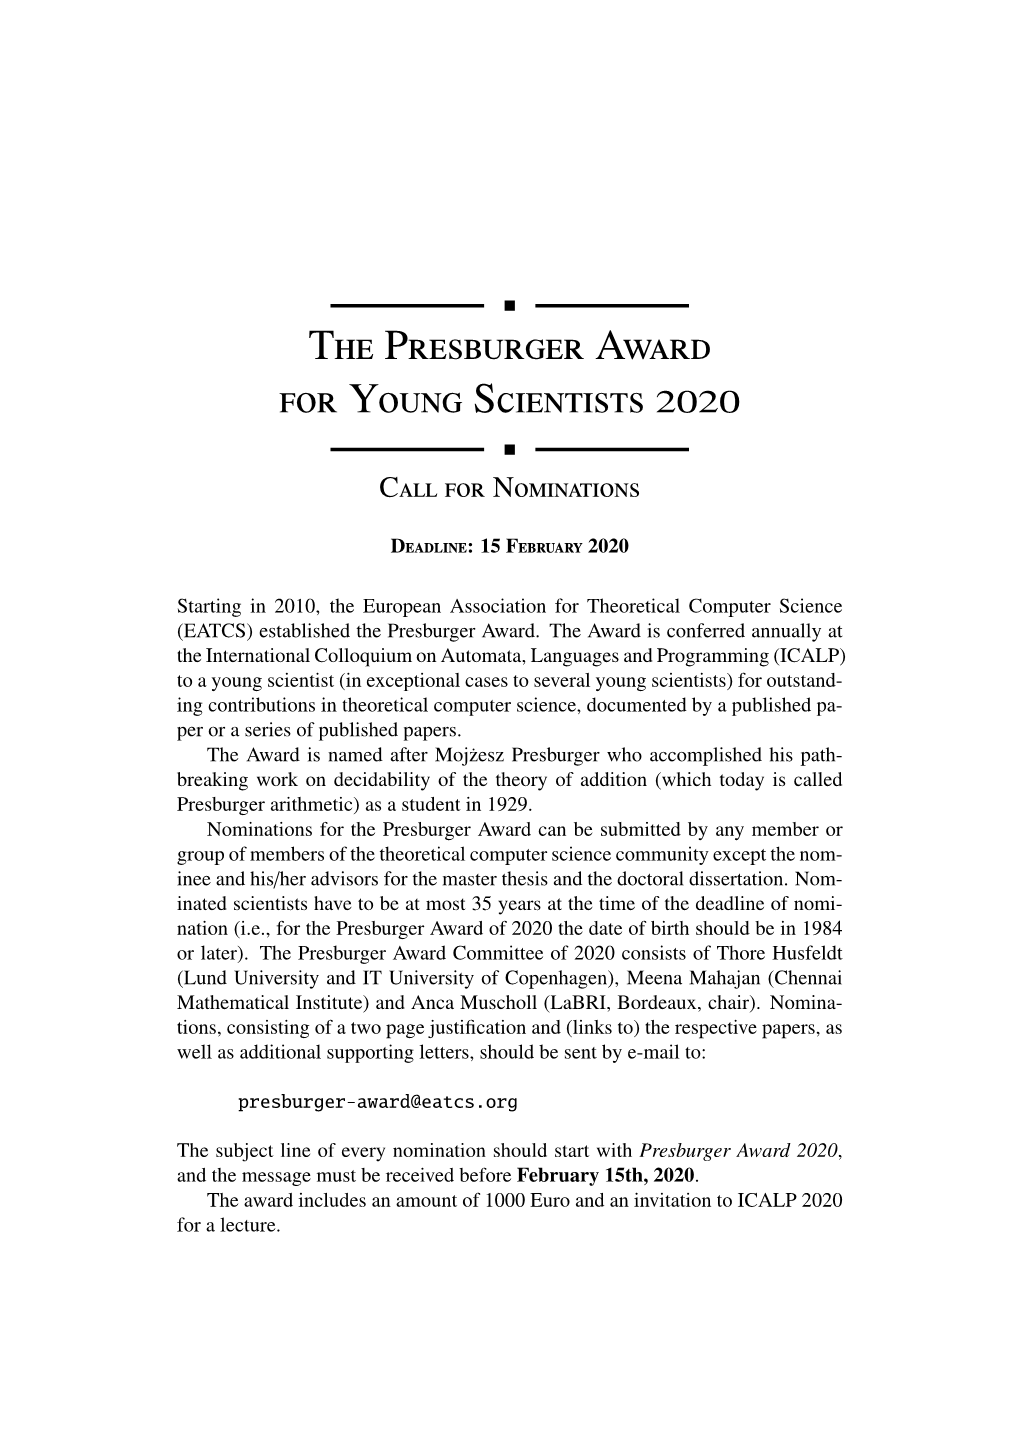 The Presburger Award for Young Scientists 2020